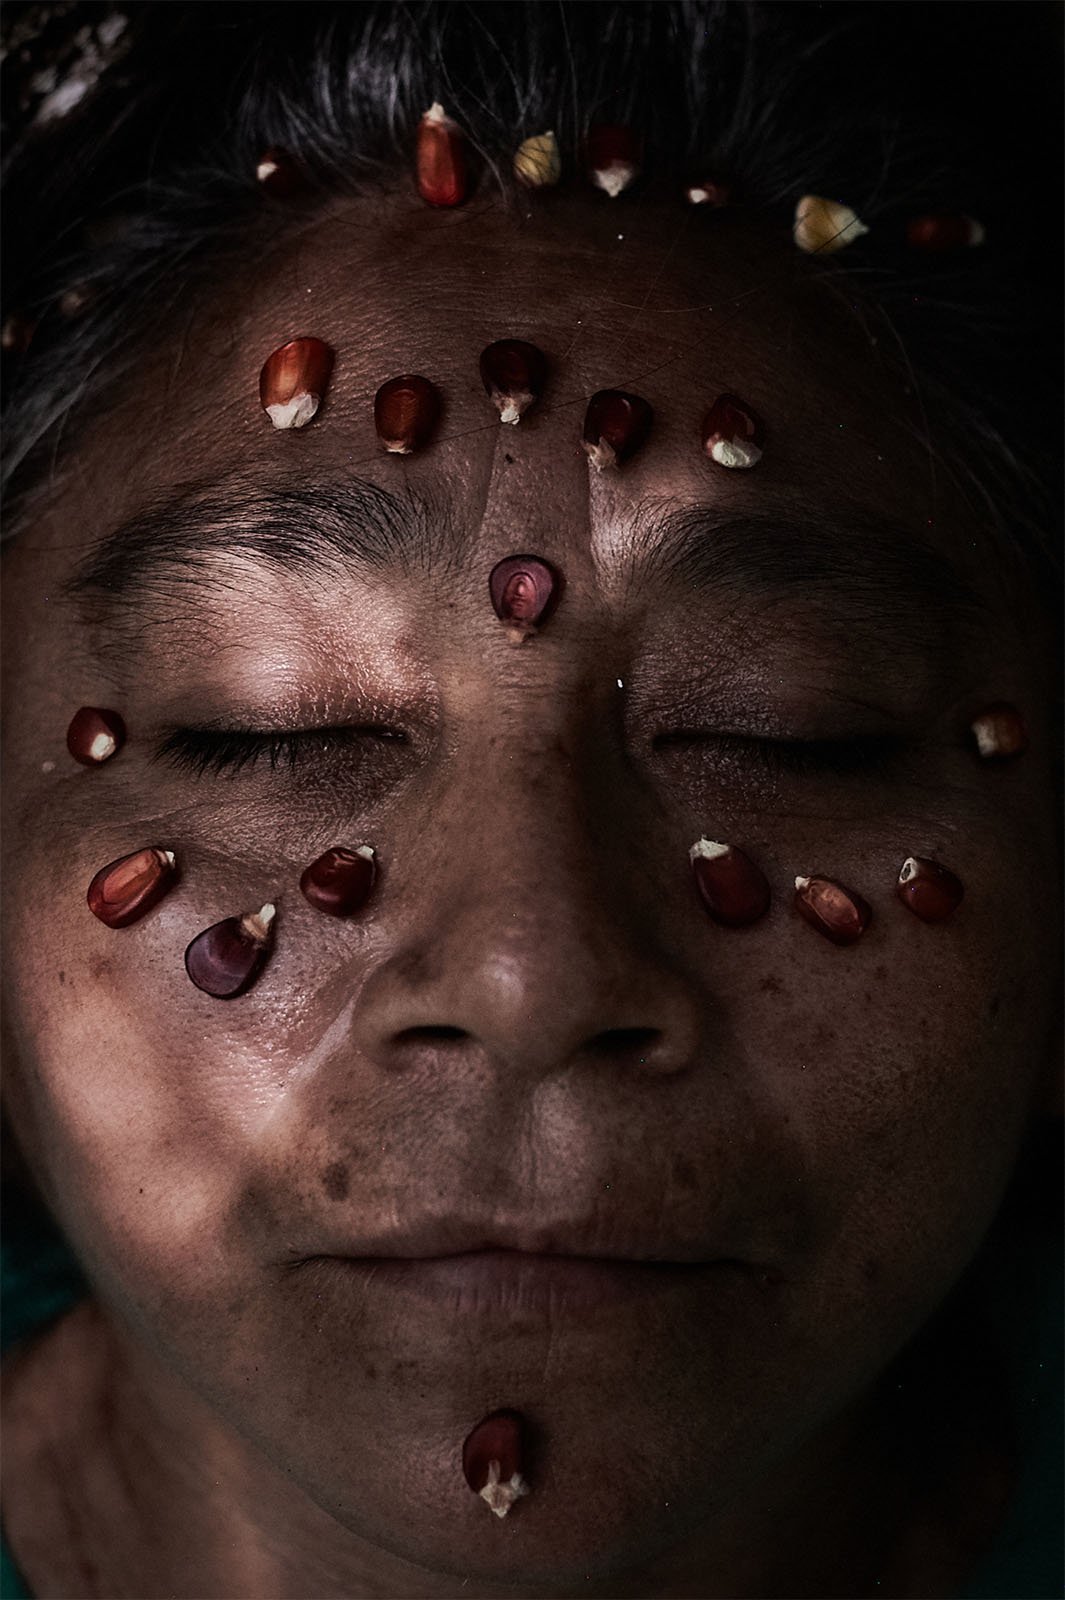 Close-up portrait of a person's face covered with various grains of corn arranged in patterns, with closed eyes. the image is dark and moody, focusing on the unique corn decoration on their skin.